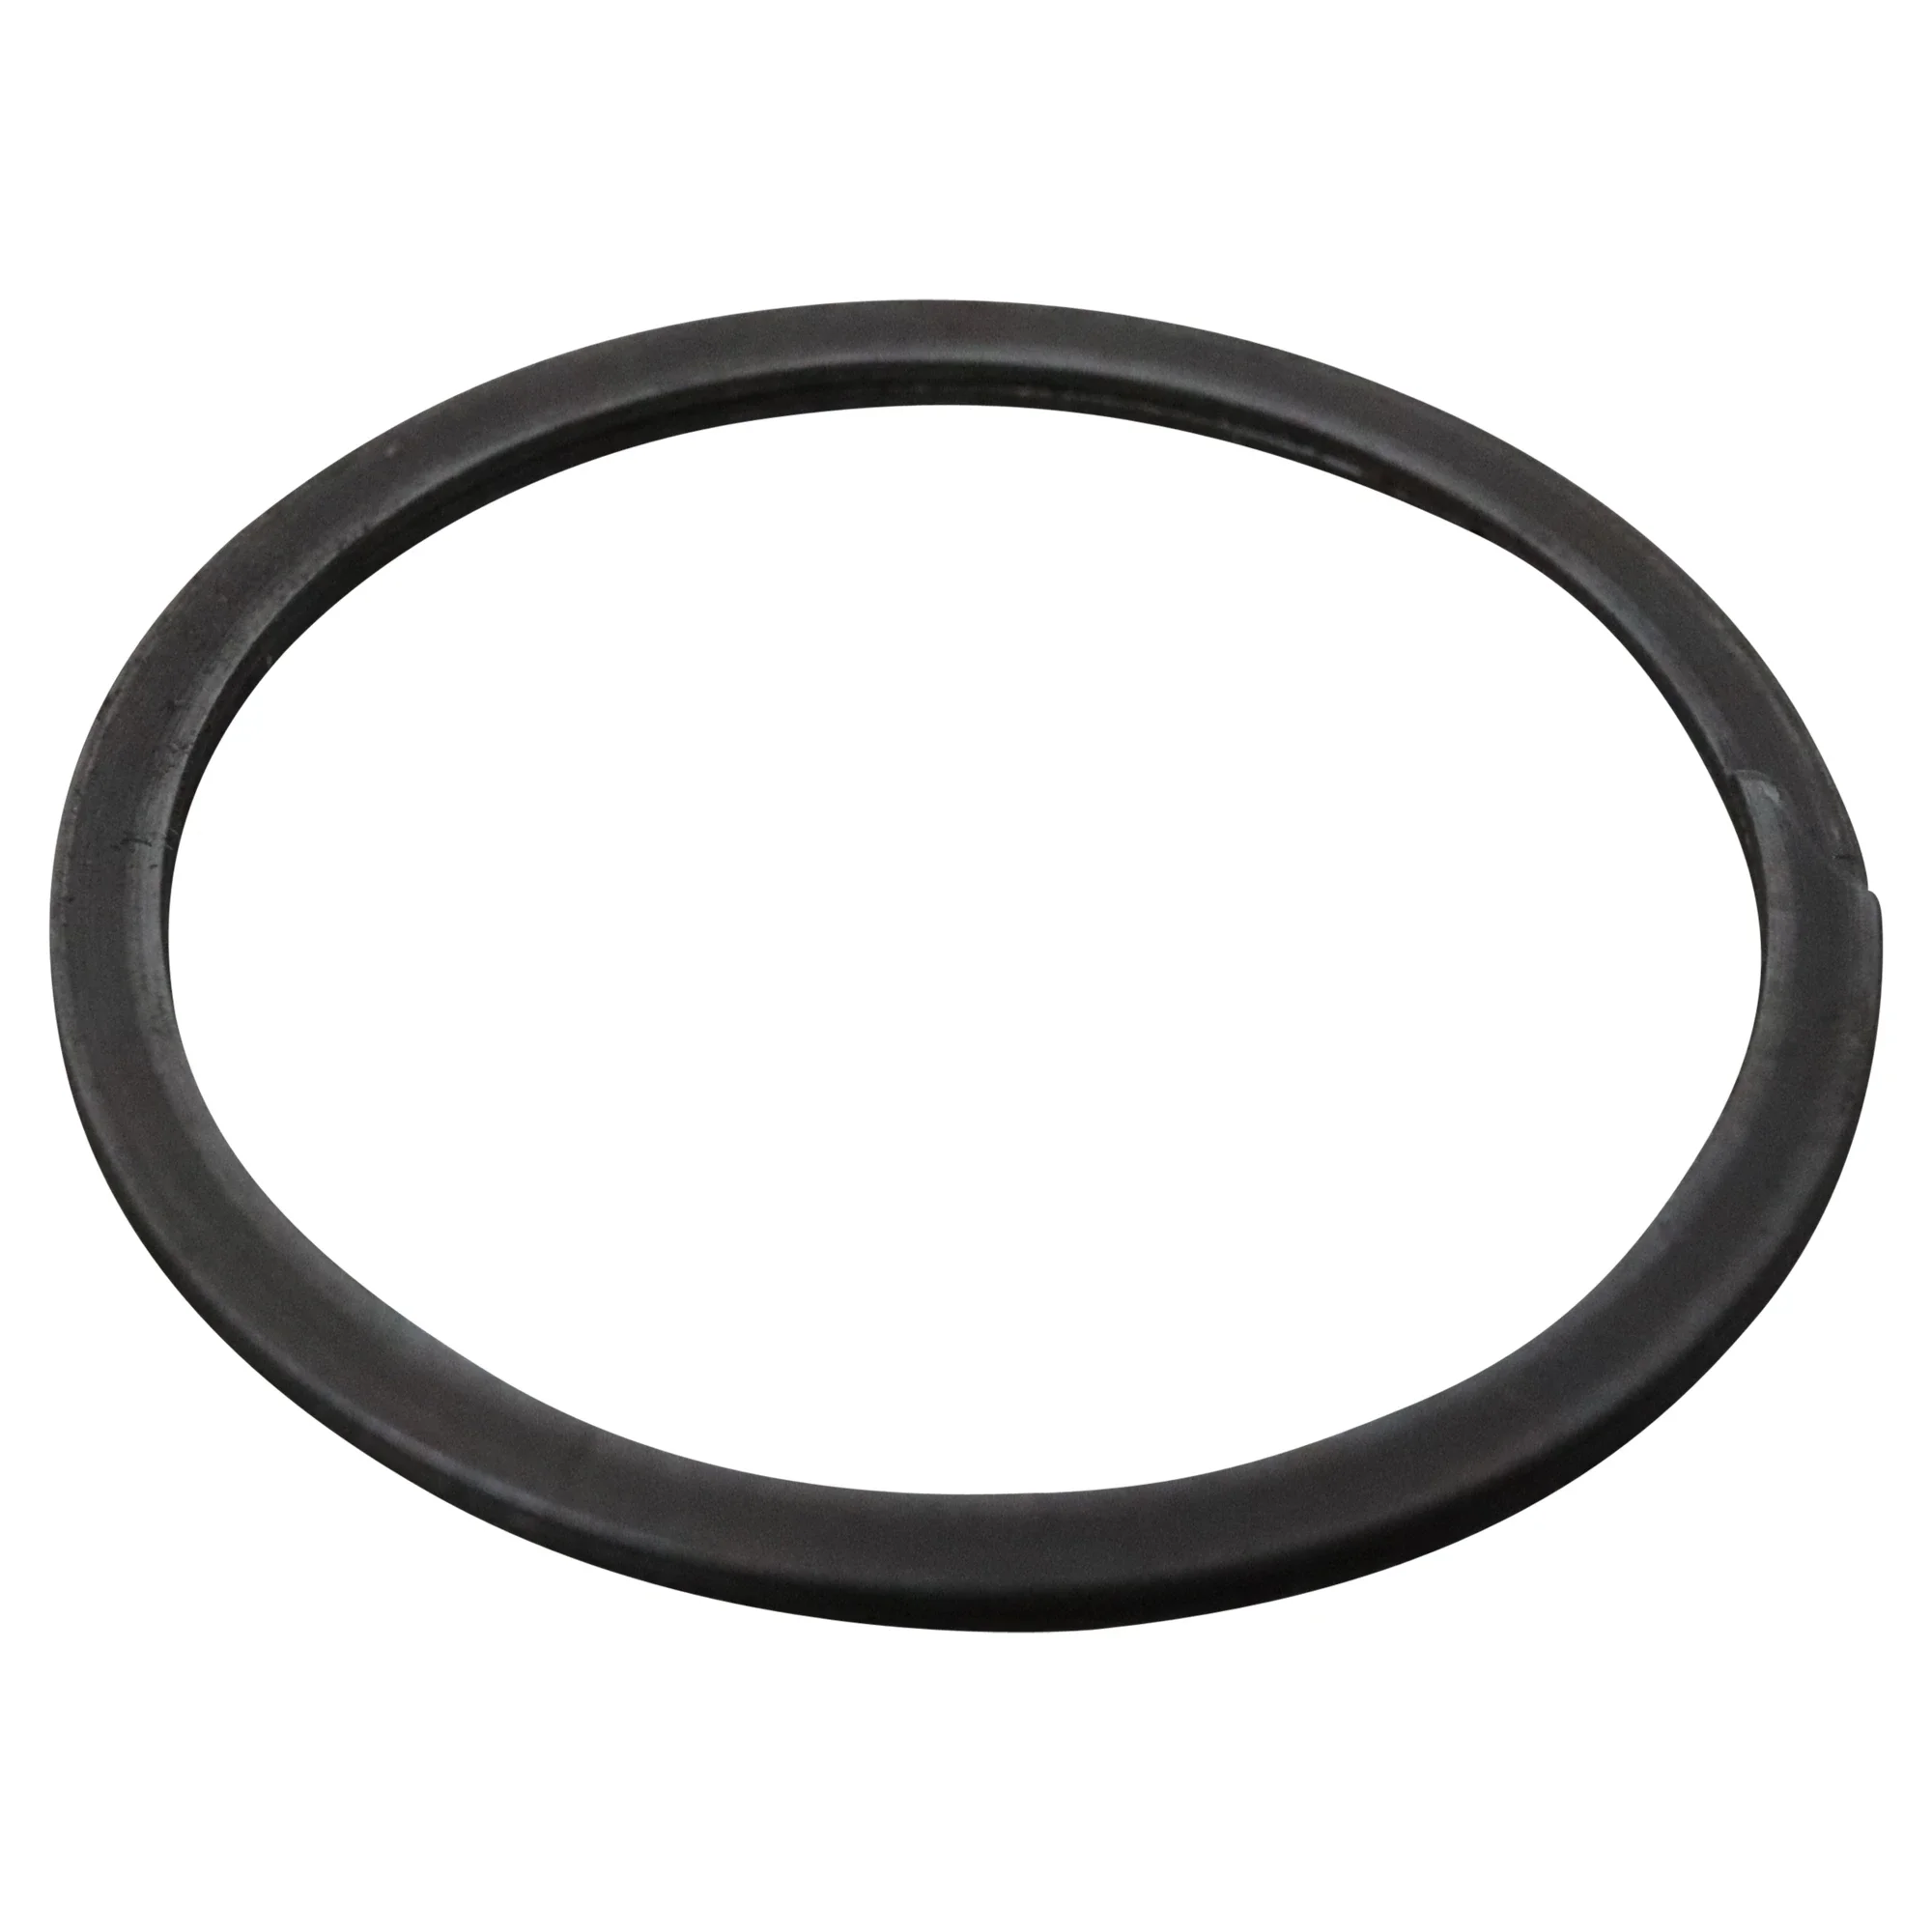 Wastebuilt® Replacement for Heil Snap Ring 272-7888-002